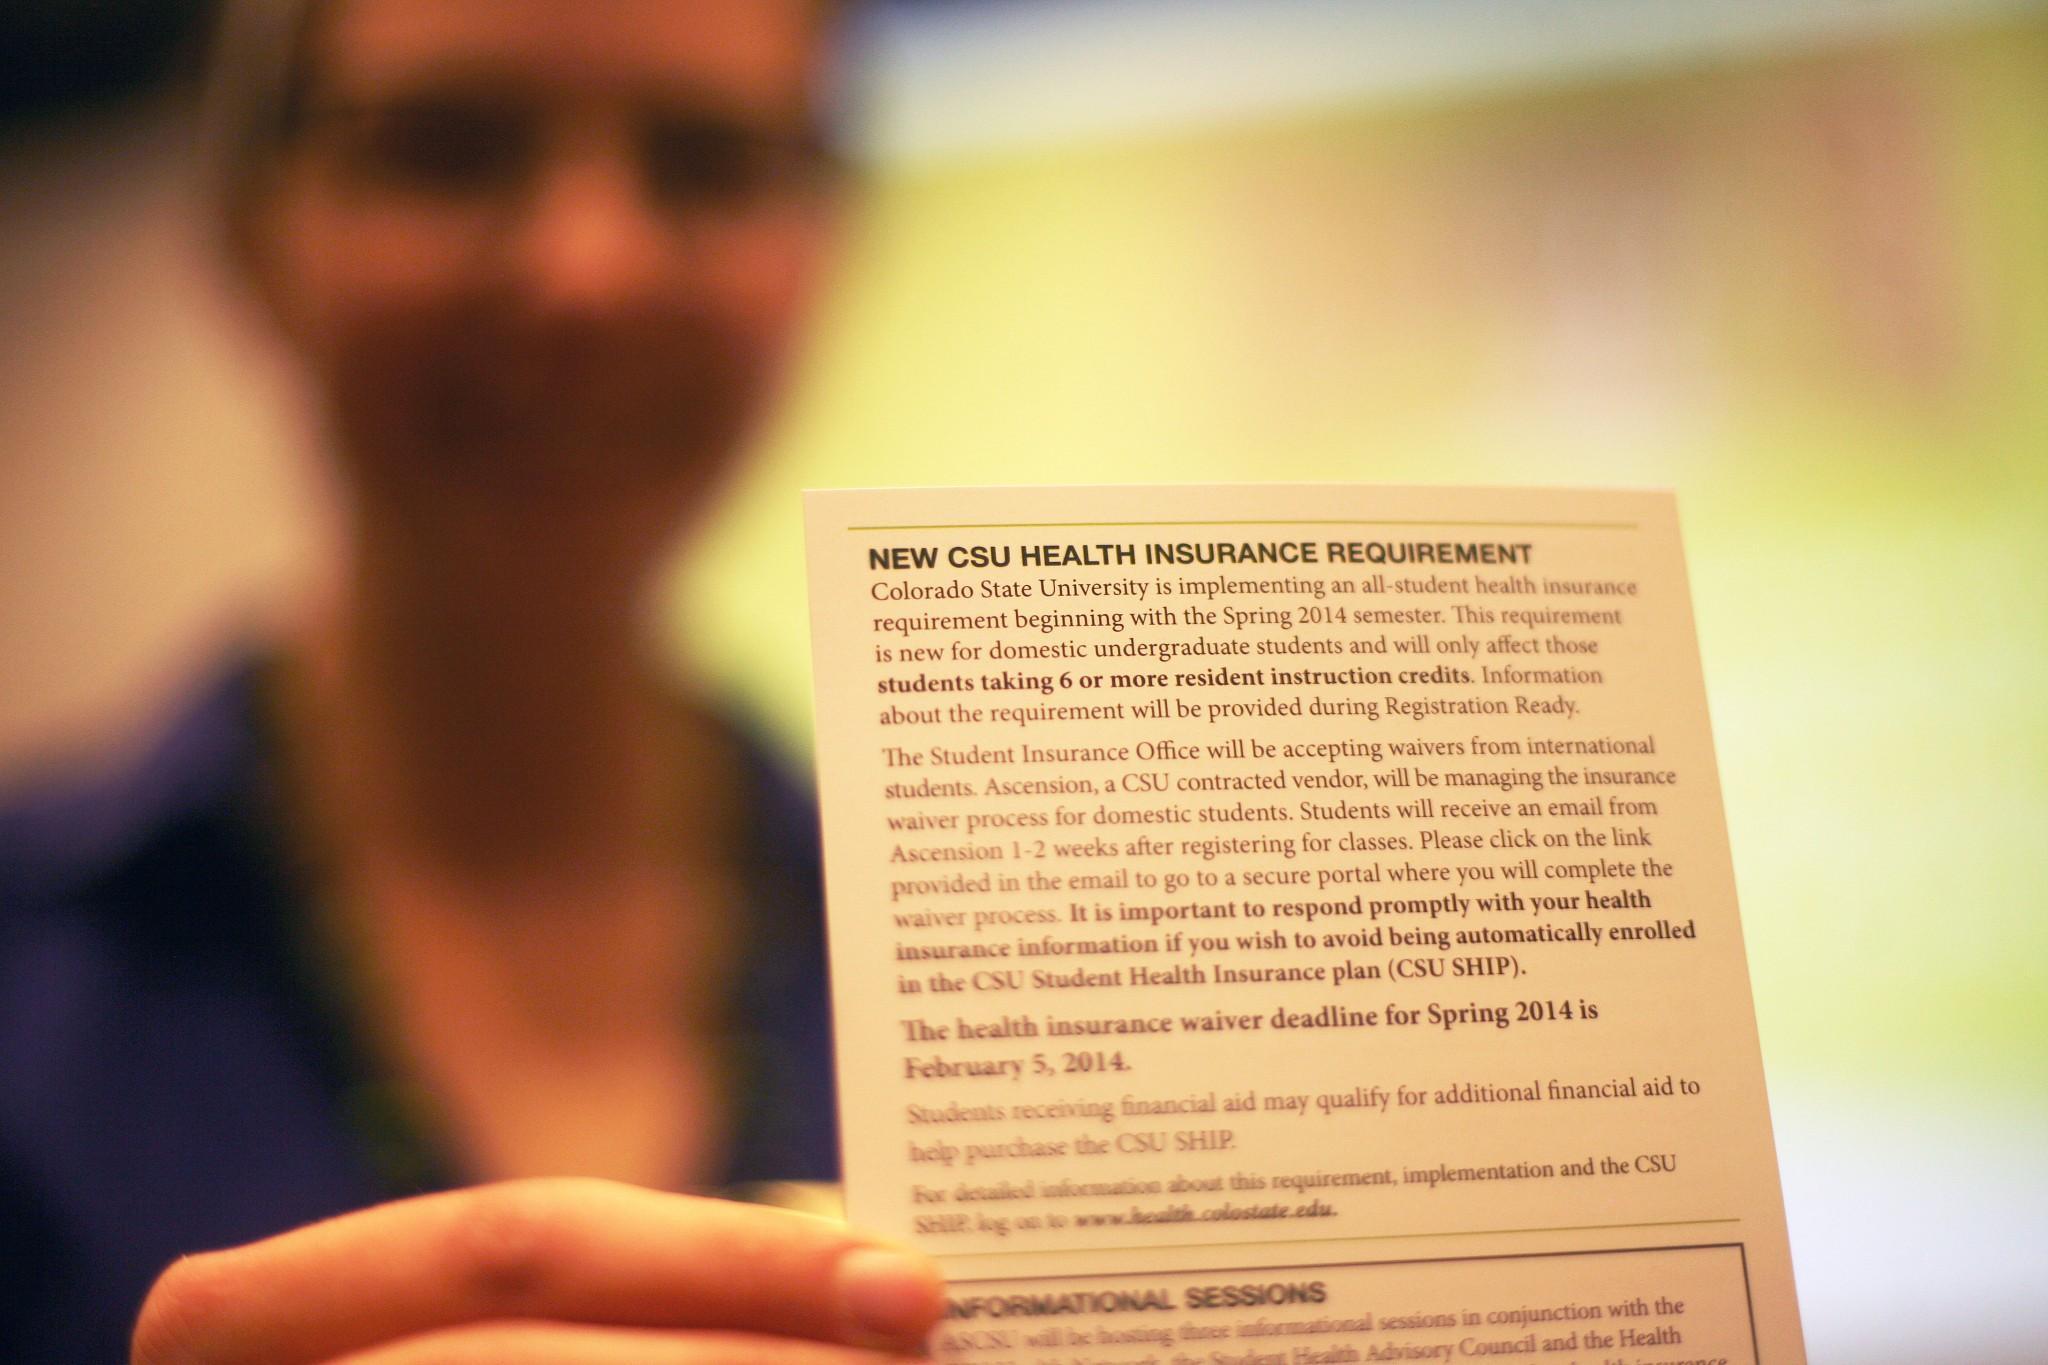 ASCSU Executive Direct of Health Mackenzie Whitesell holds up an informational card about the change in the CSU health care requirements with the implementation of Obamacare. Health insurance is now mandatory for all CSU students to have and if student’s do not provide proof of their health insurance by Feb. 5th they will be automatically enrolled in CSU’s health plan.